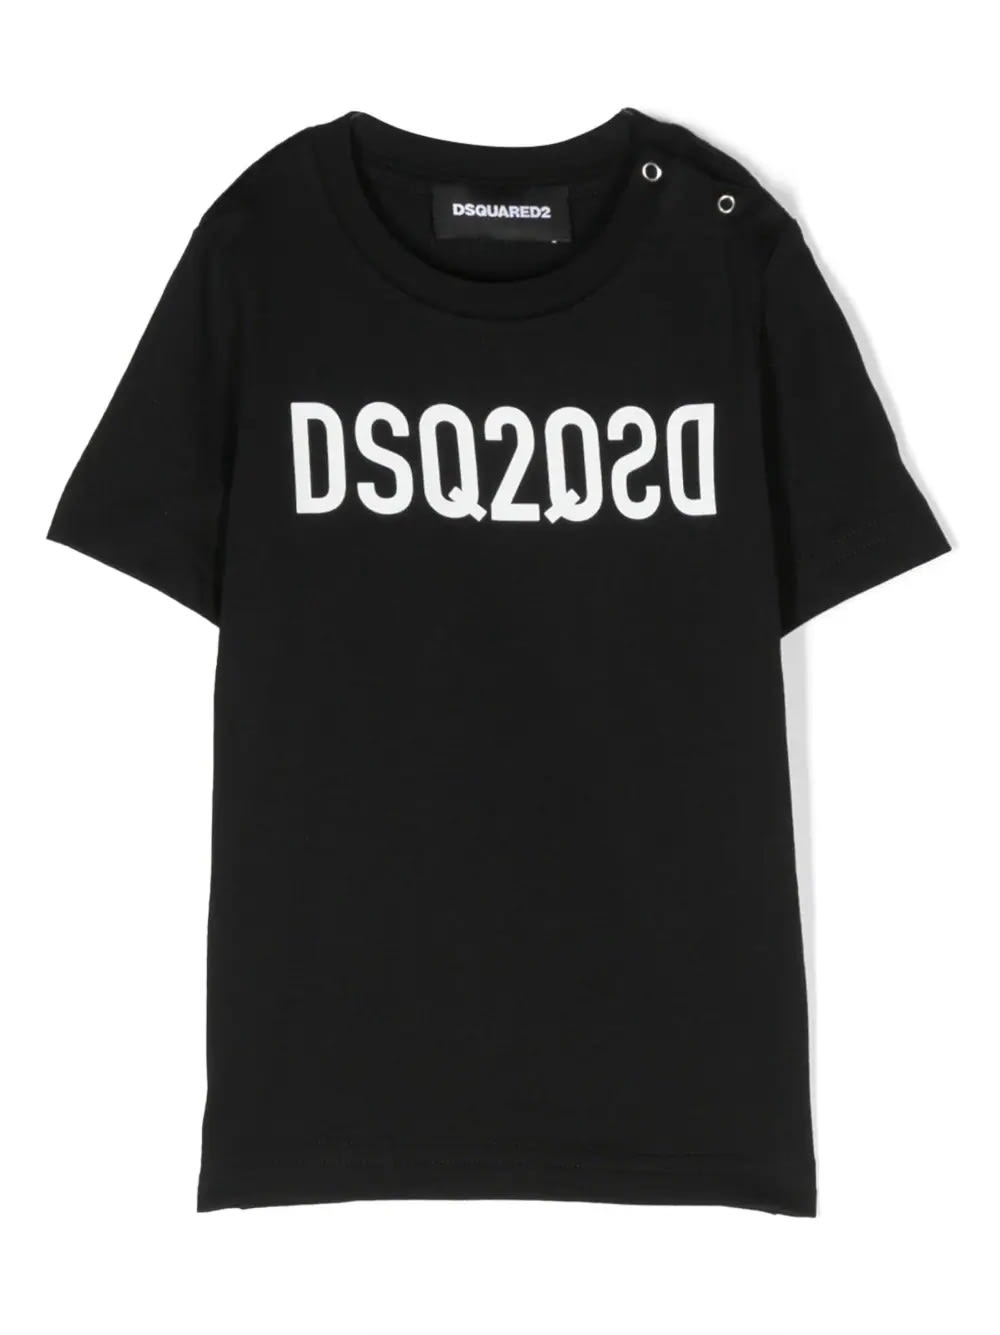 DSQUARED2 BLACK T-SHIRT WITH DSQ2 LOGO REFLECTED